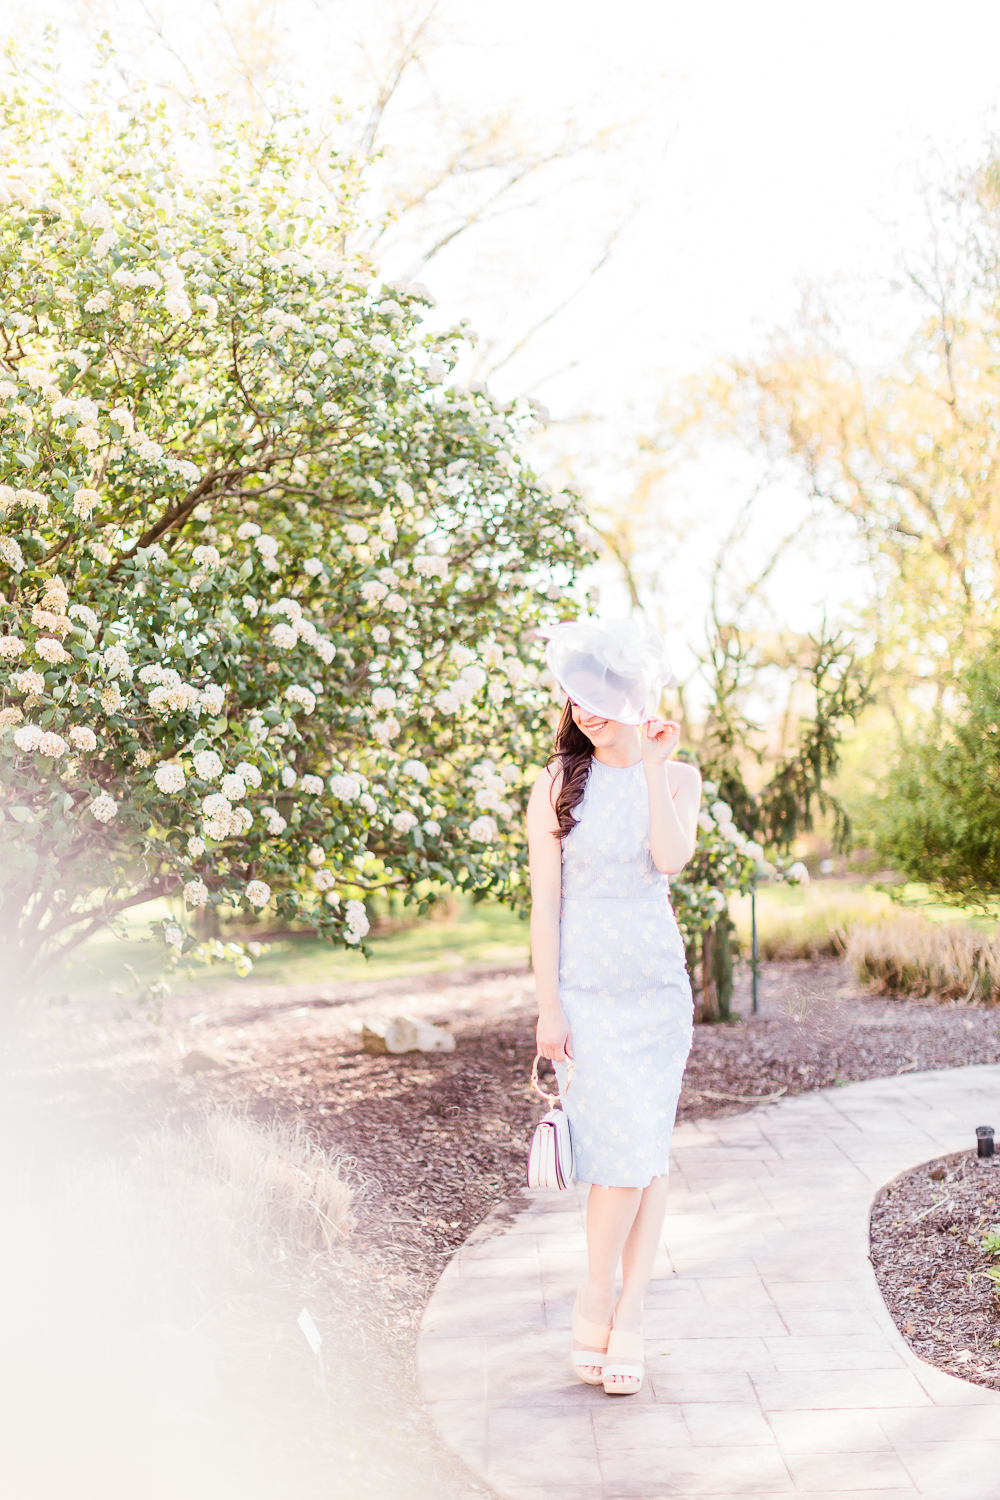 Maggy London Cecilia Midi Dress styled with a white fascinator headband, white Chloe Nile dupe bag, and espadrille slide sandals, Derby Day Style Guide: 3 Head-to-Toe Kentucky Derby Outfit Ideas by affordable fashion blogger Stephanie Ziajka from Diary of a Debutante